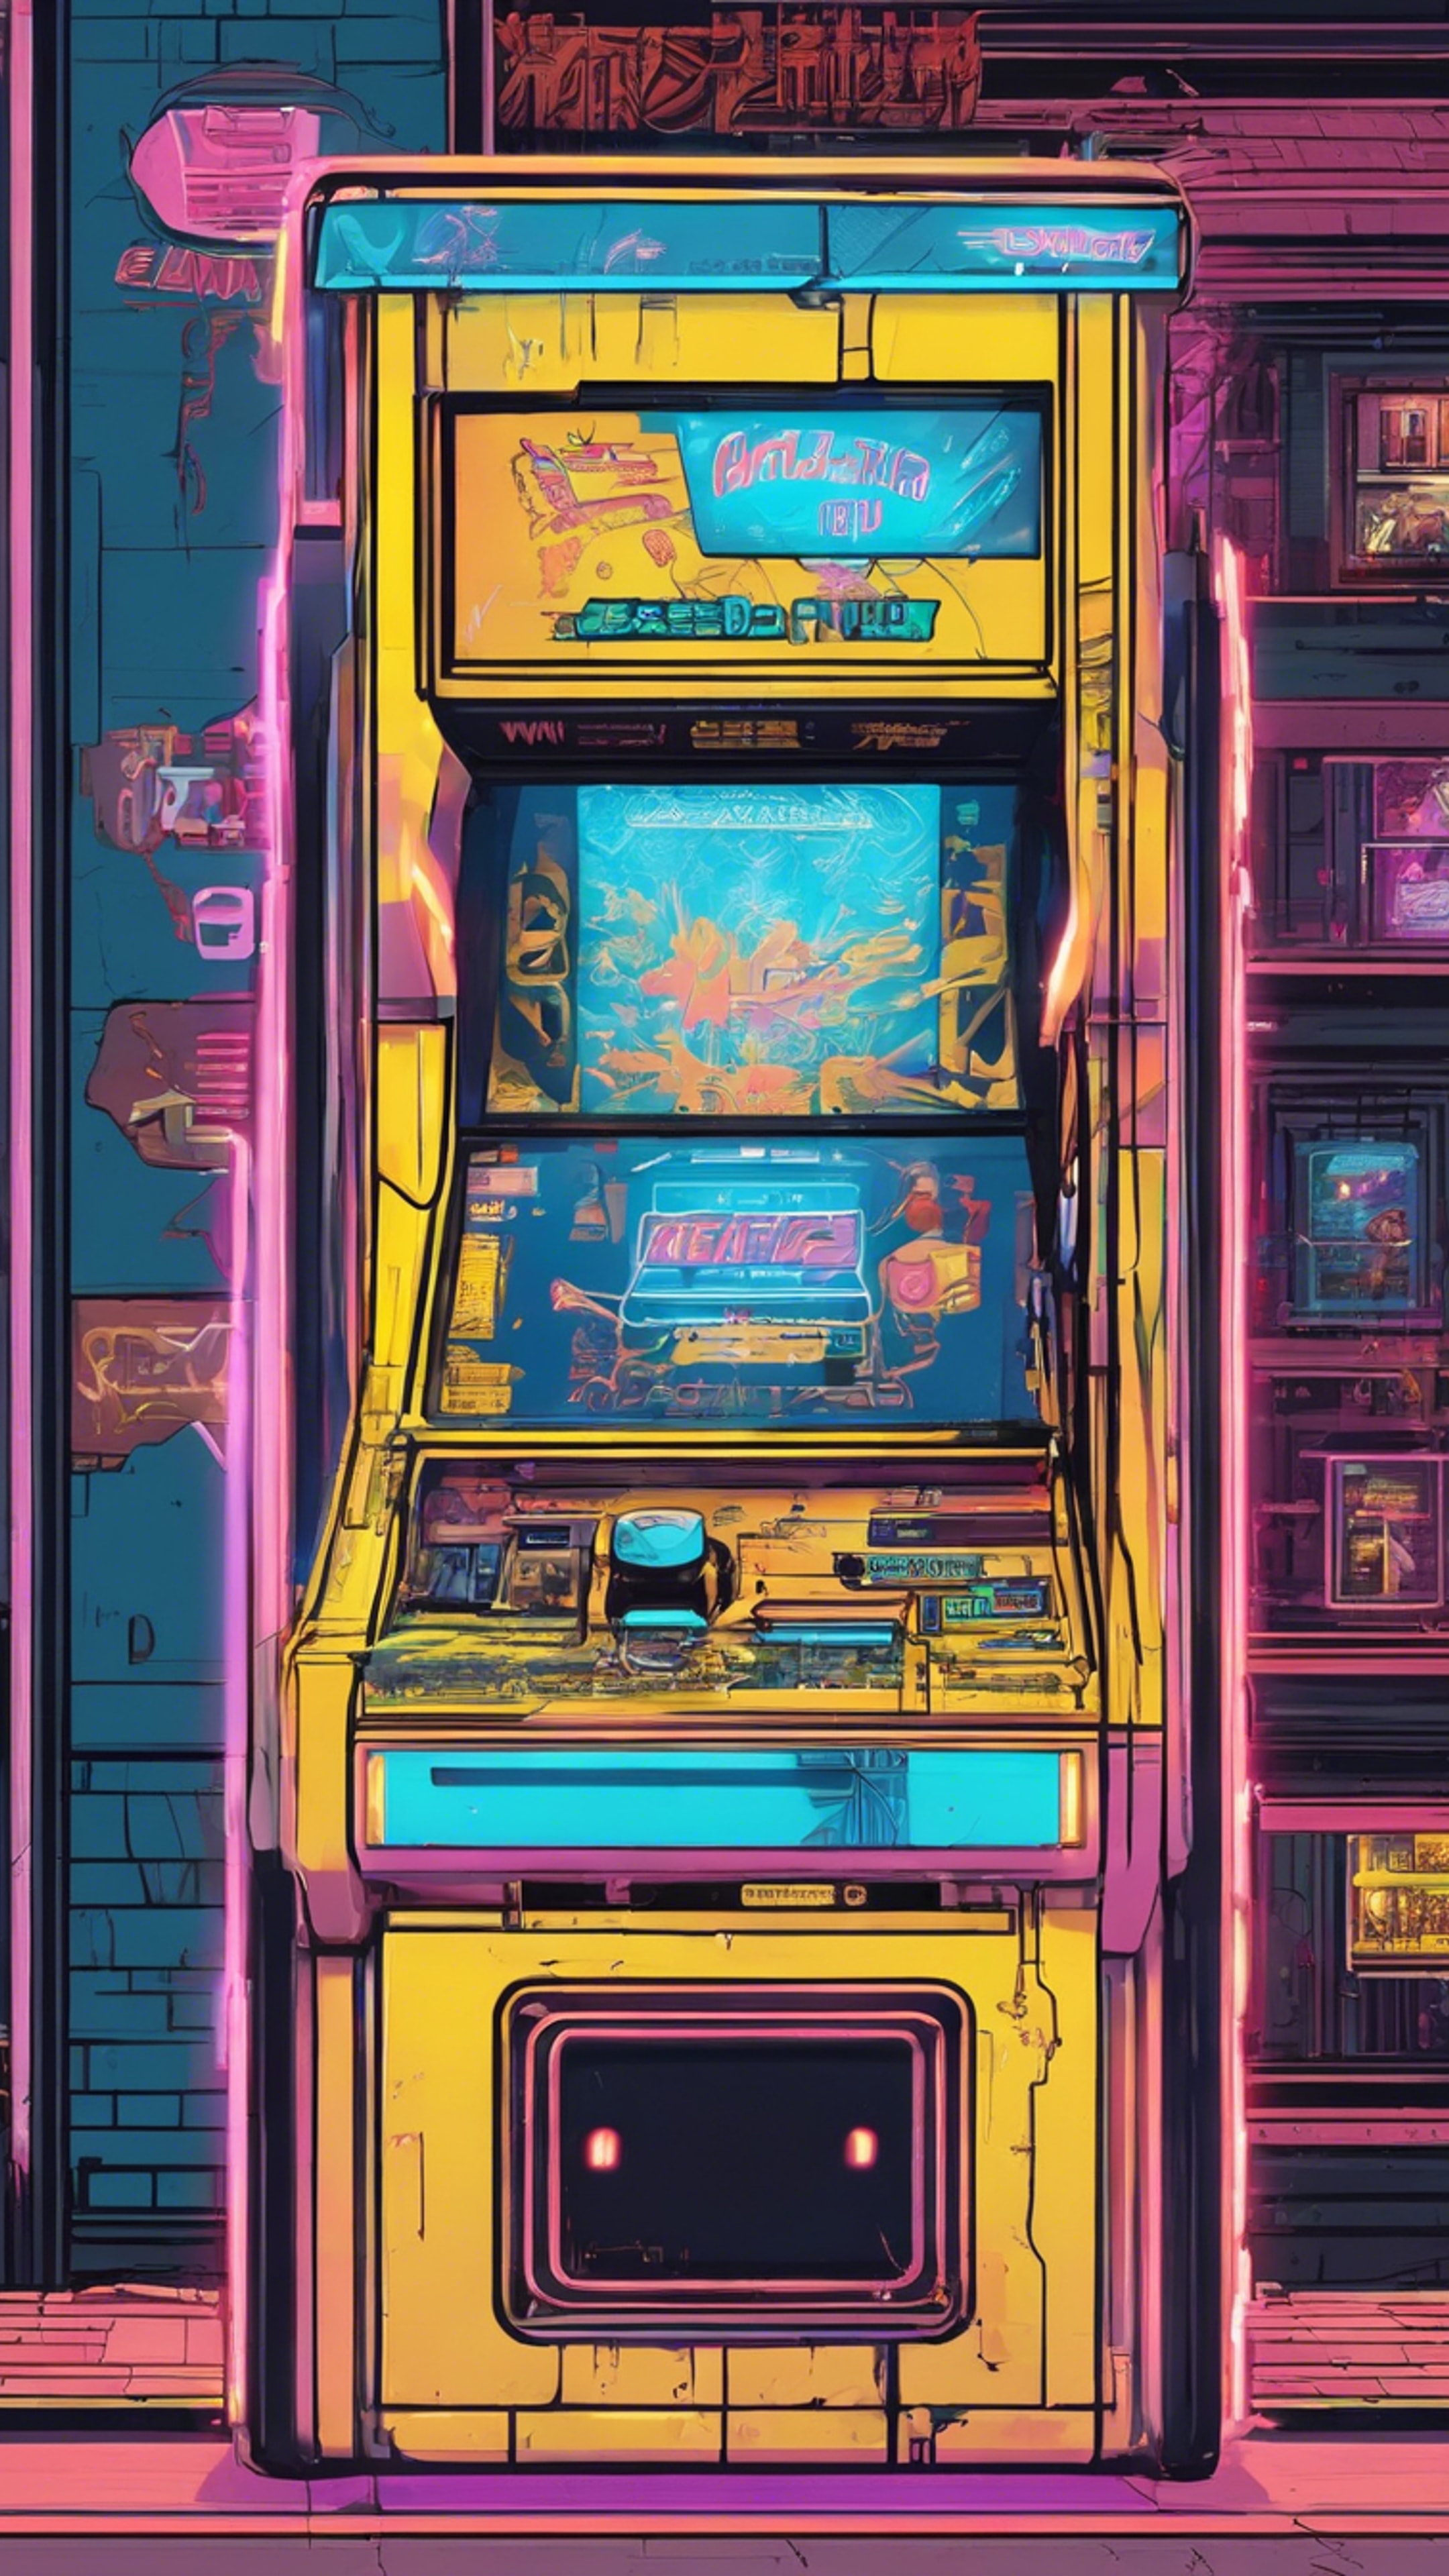 A vintage arcade machine with blue and yellow detailing, set in a retro game shop. Tapeta[7a93d221b5de45b8b20a]